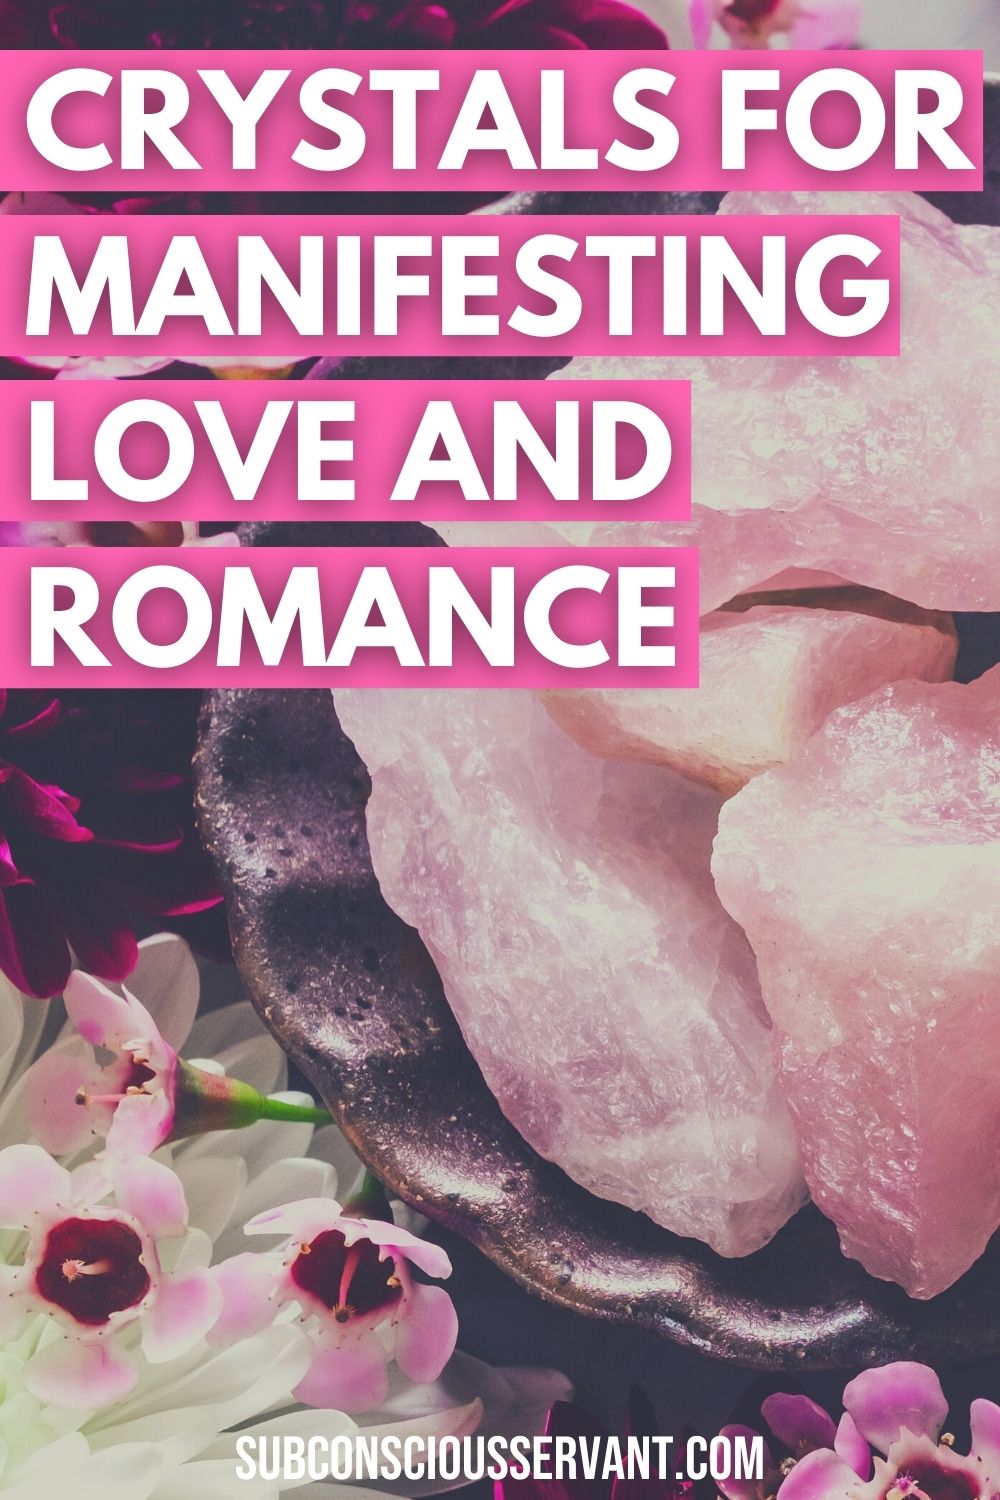 Crystals For Manifesting Love And Romance (The 17 Best Ones)